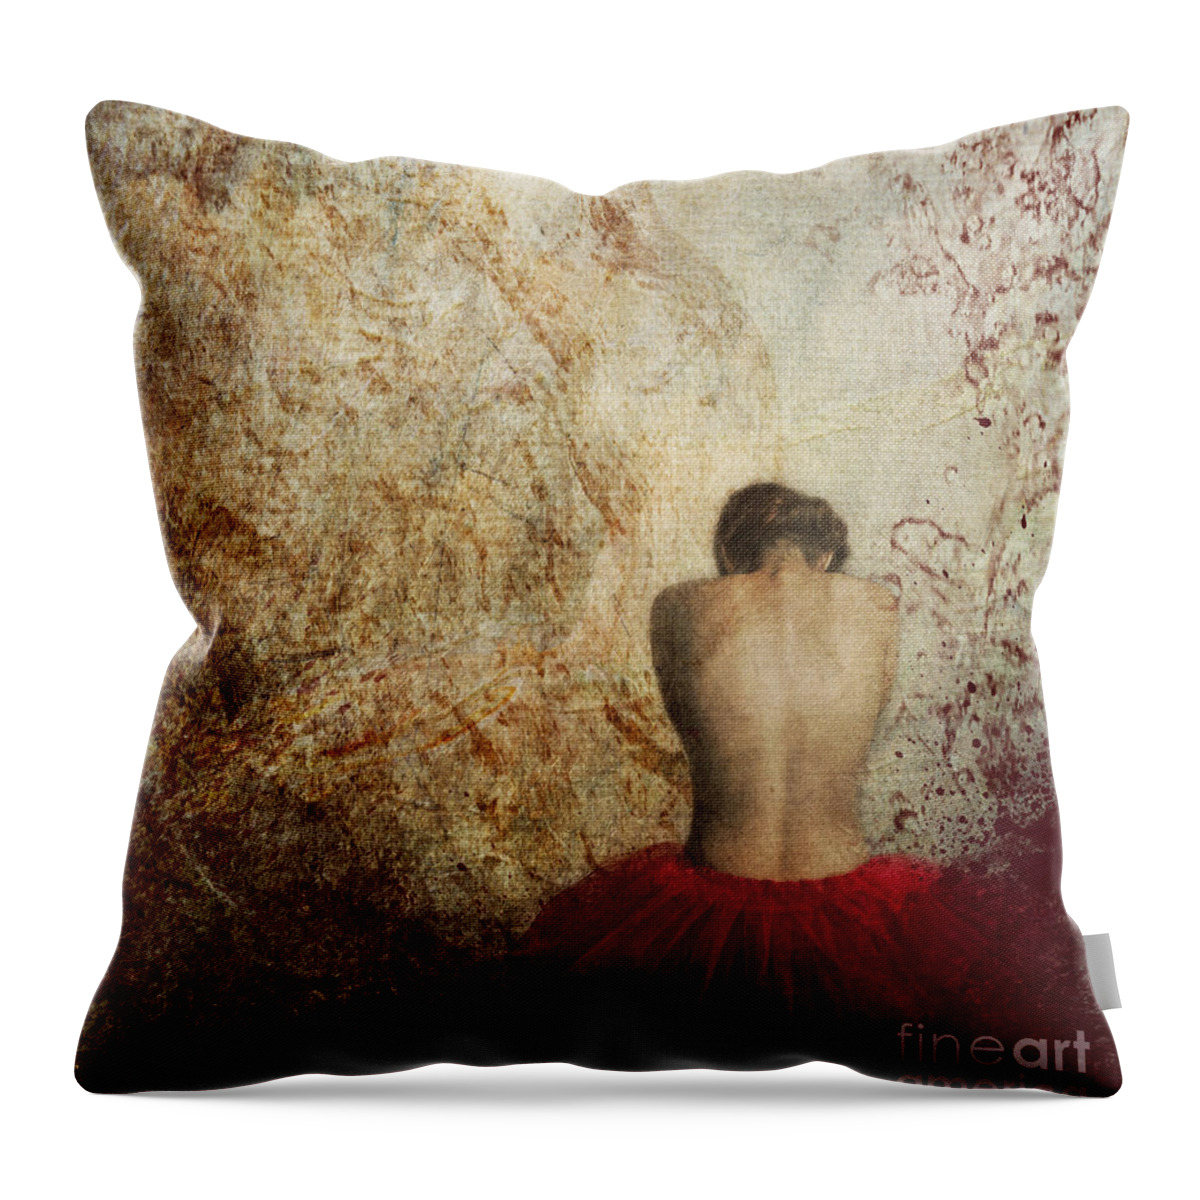 Woman Throw Pillow featuring the photograph Female Back by Jelena Jovanovic